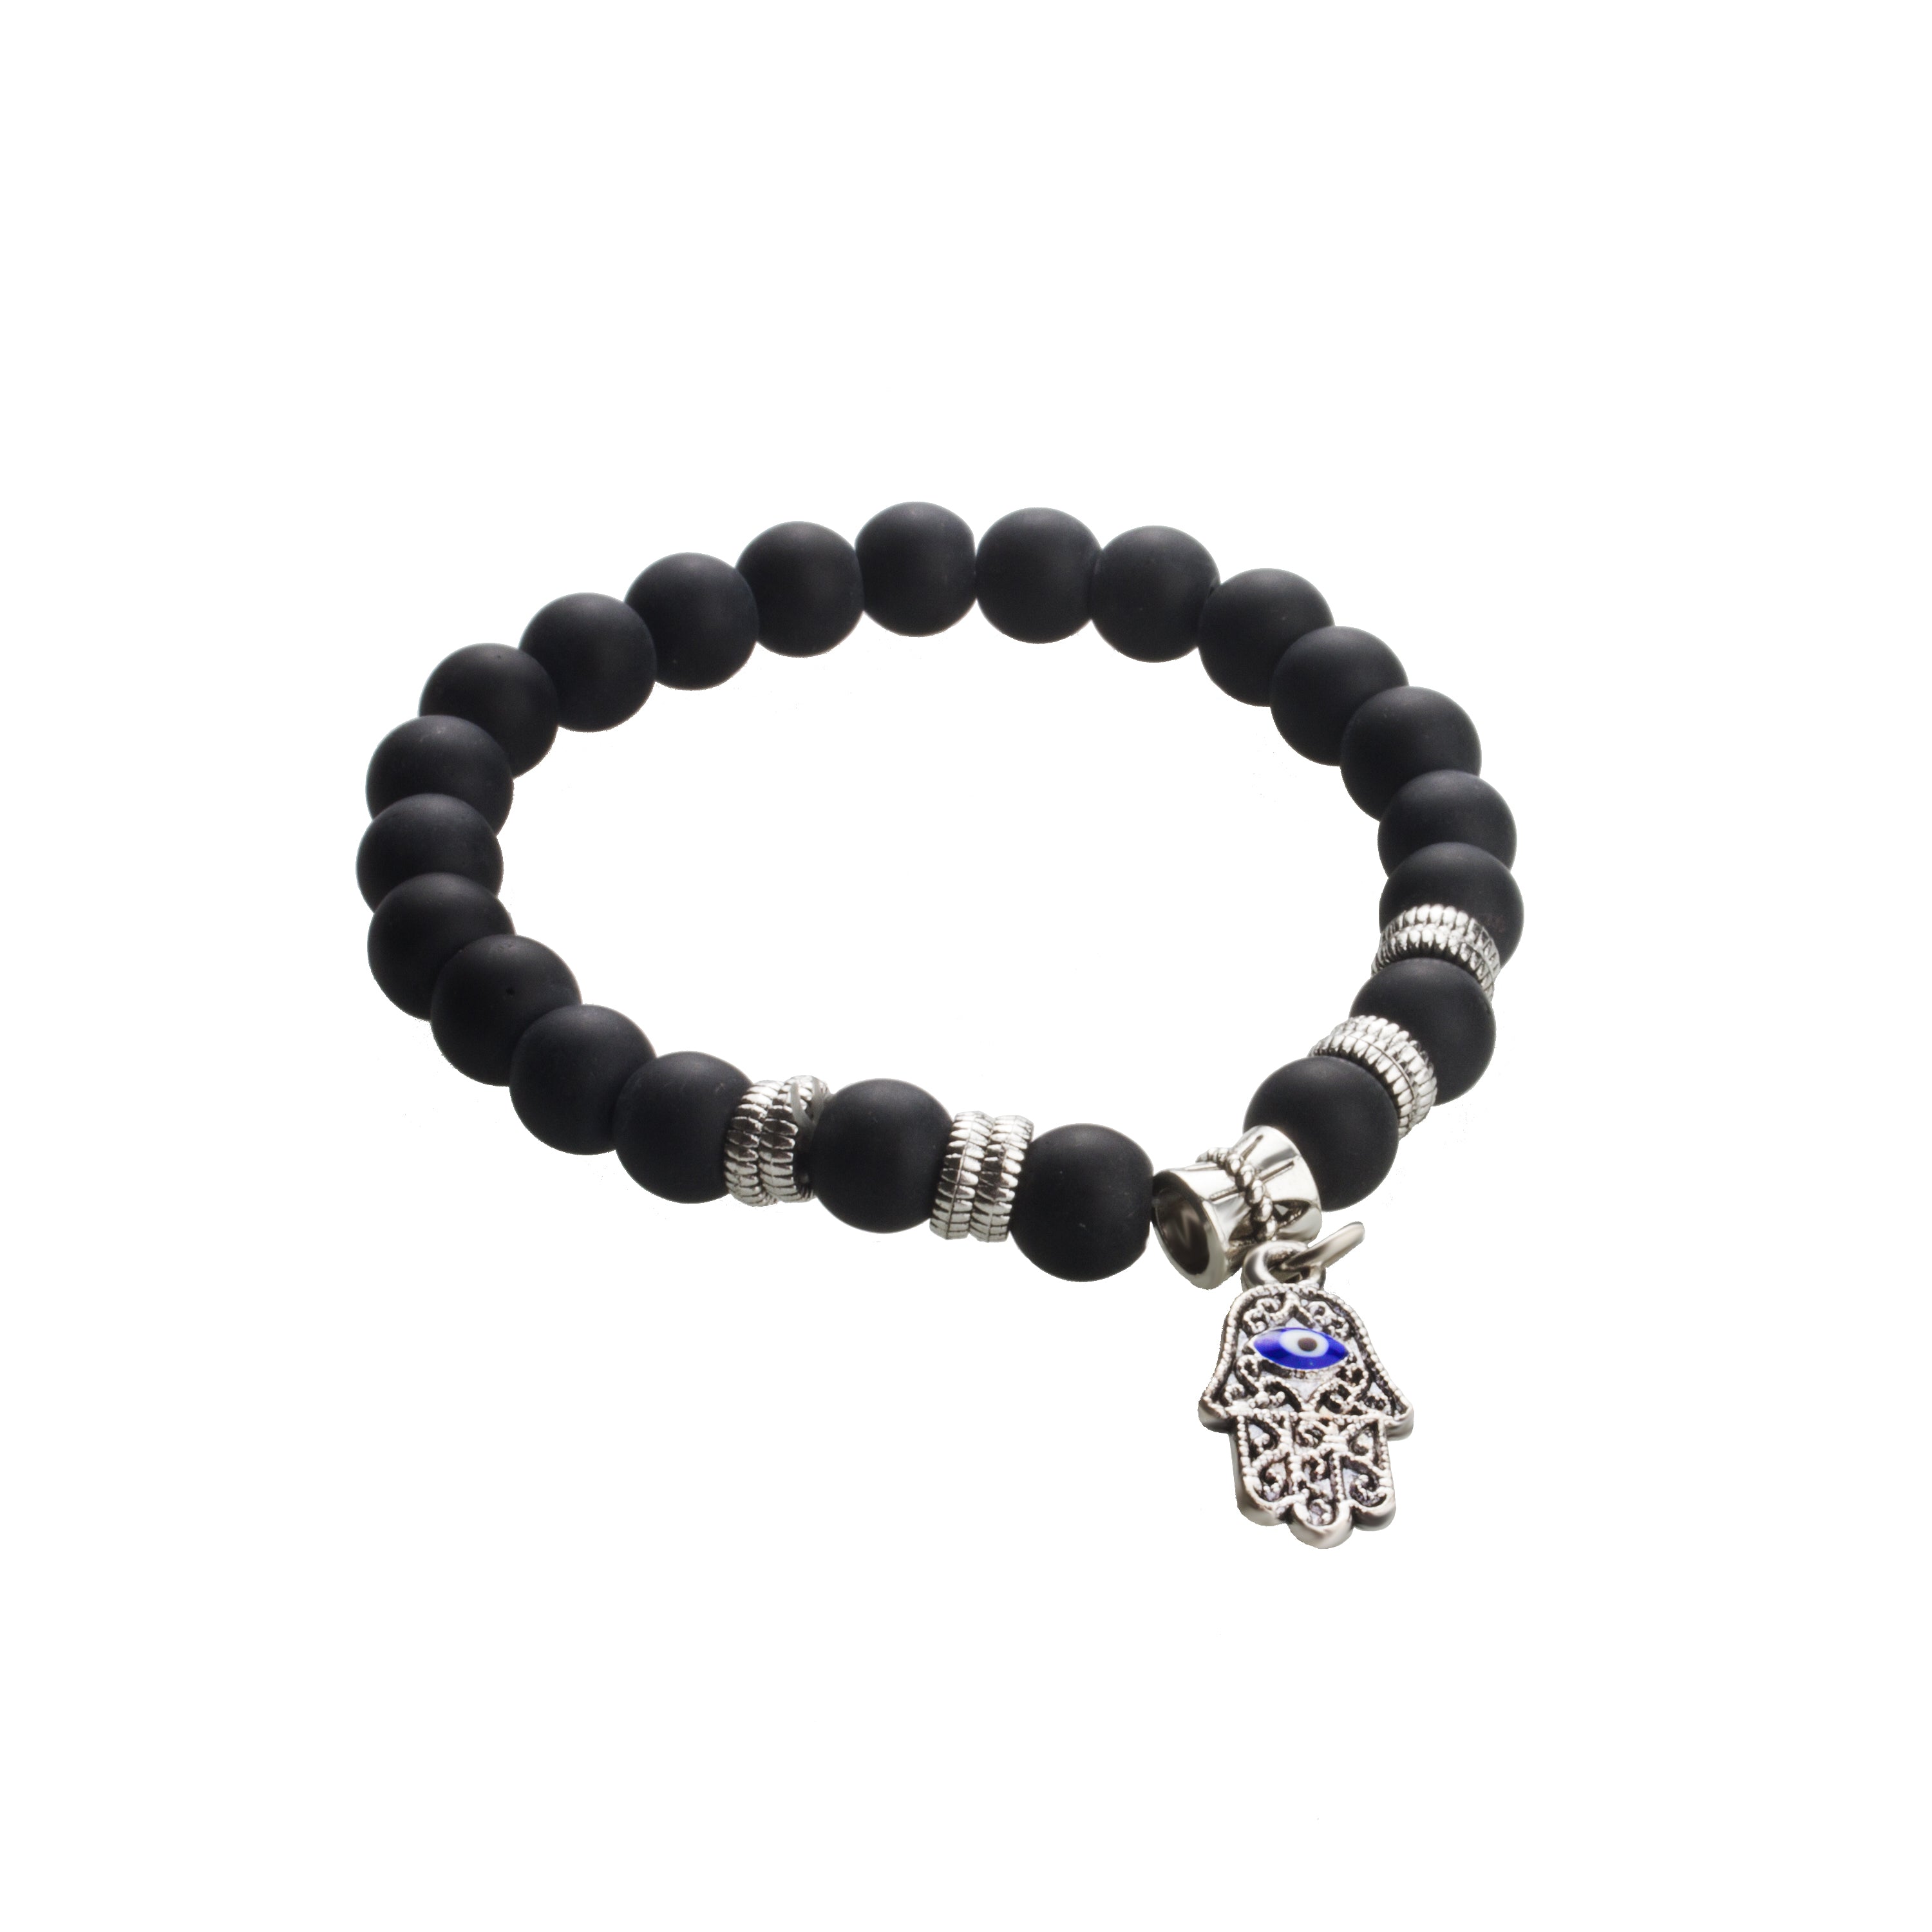 Hamsa Hand Bracelet with Evil Eyes for Peace and Protection - Evil Eyes  India